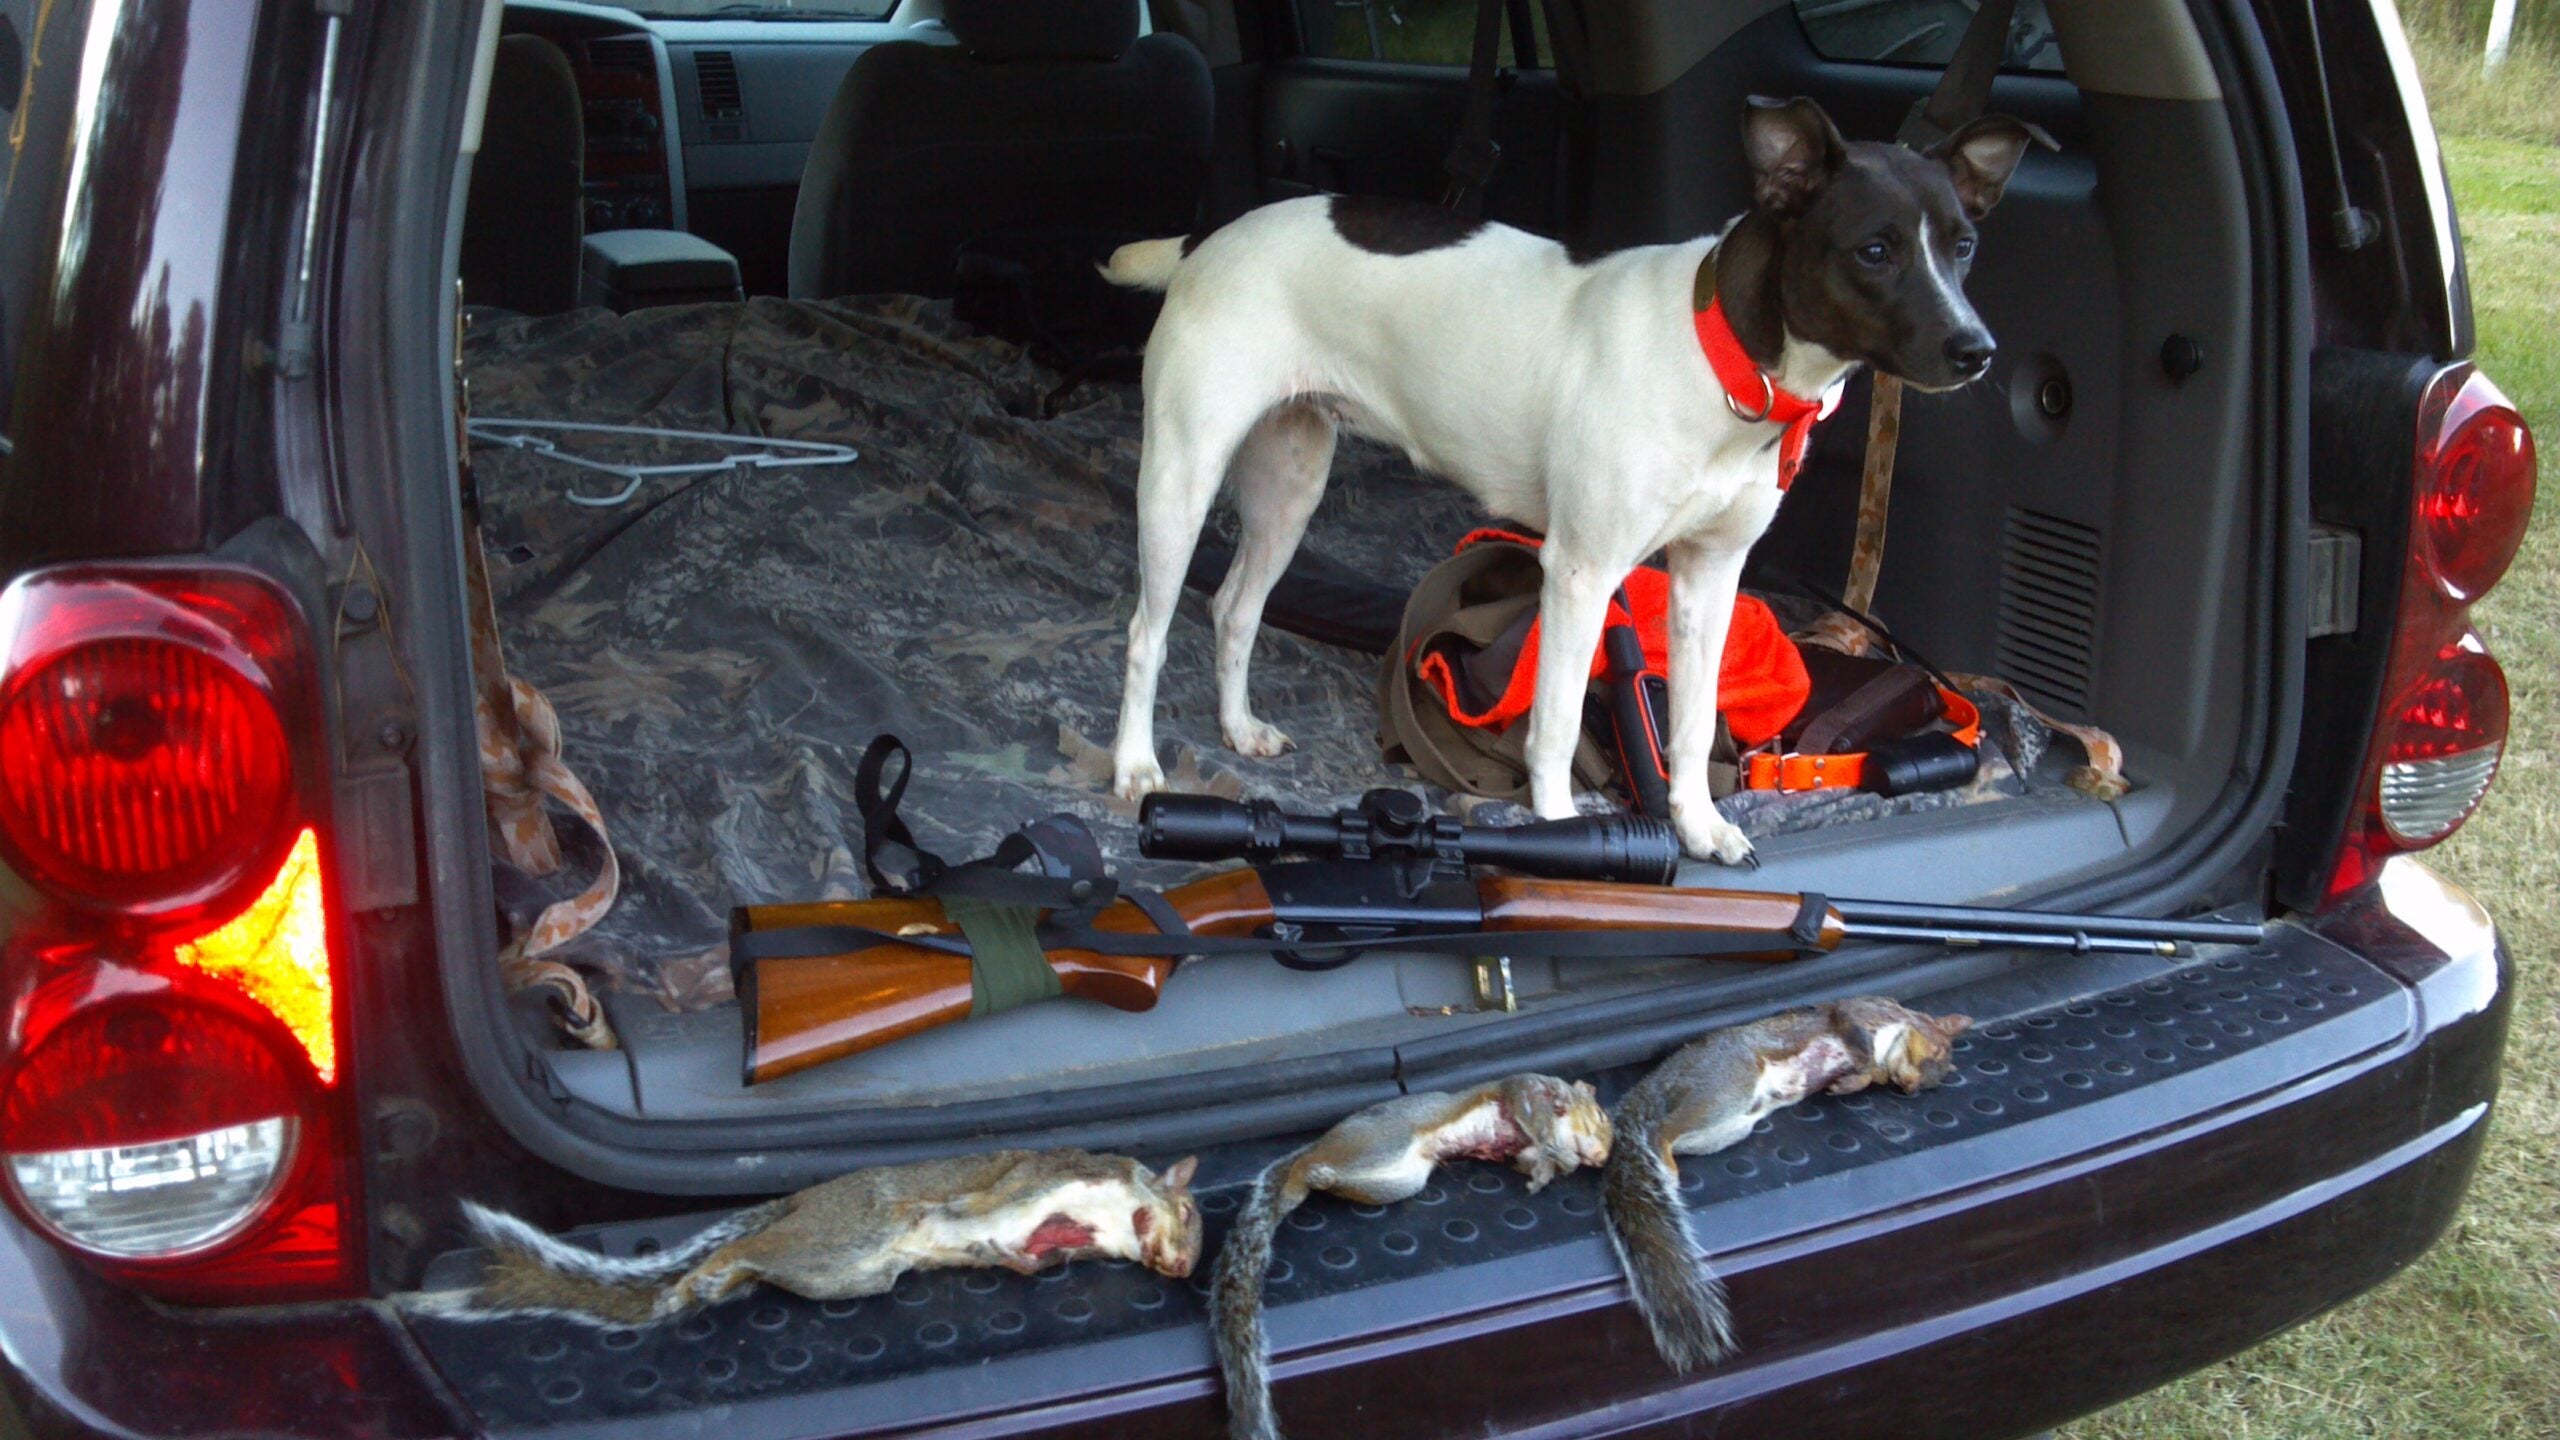 A feist squirrel hunting dog stands in the back of a vehicle near a 22 rifle and three harvested squirrels.